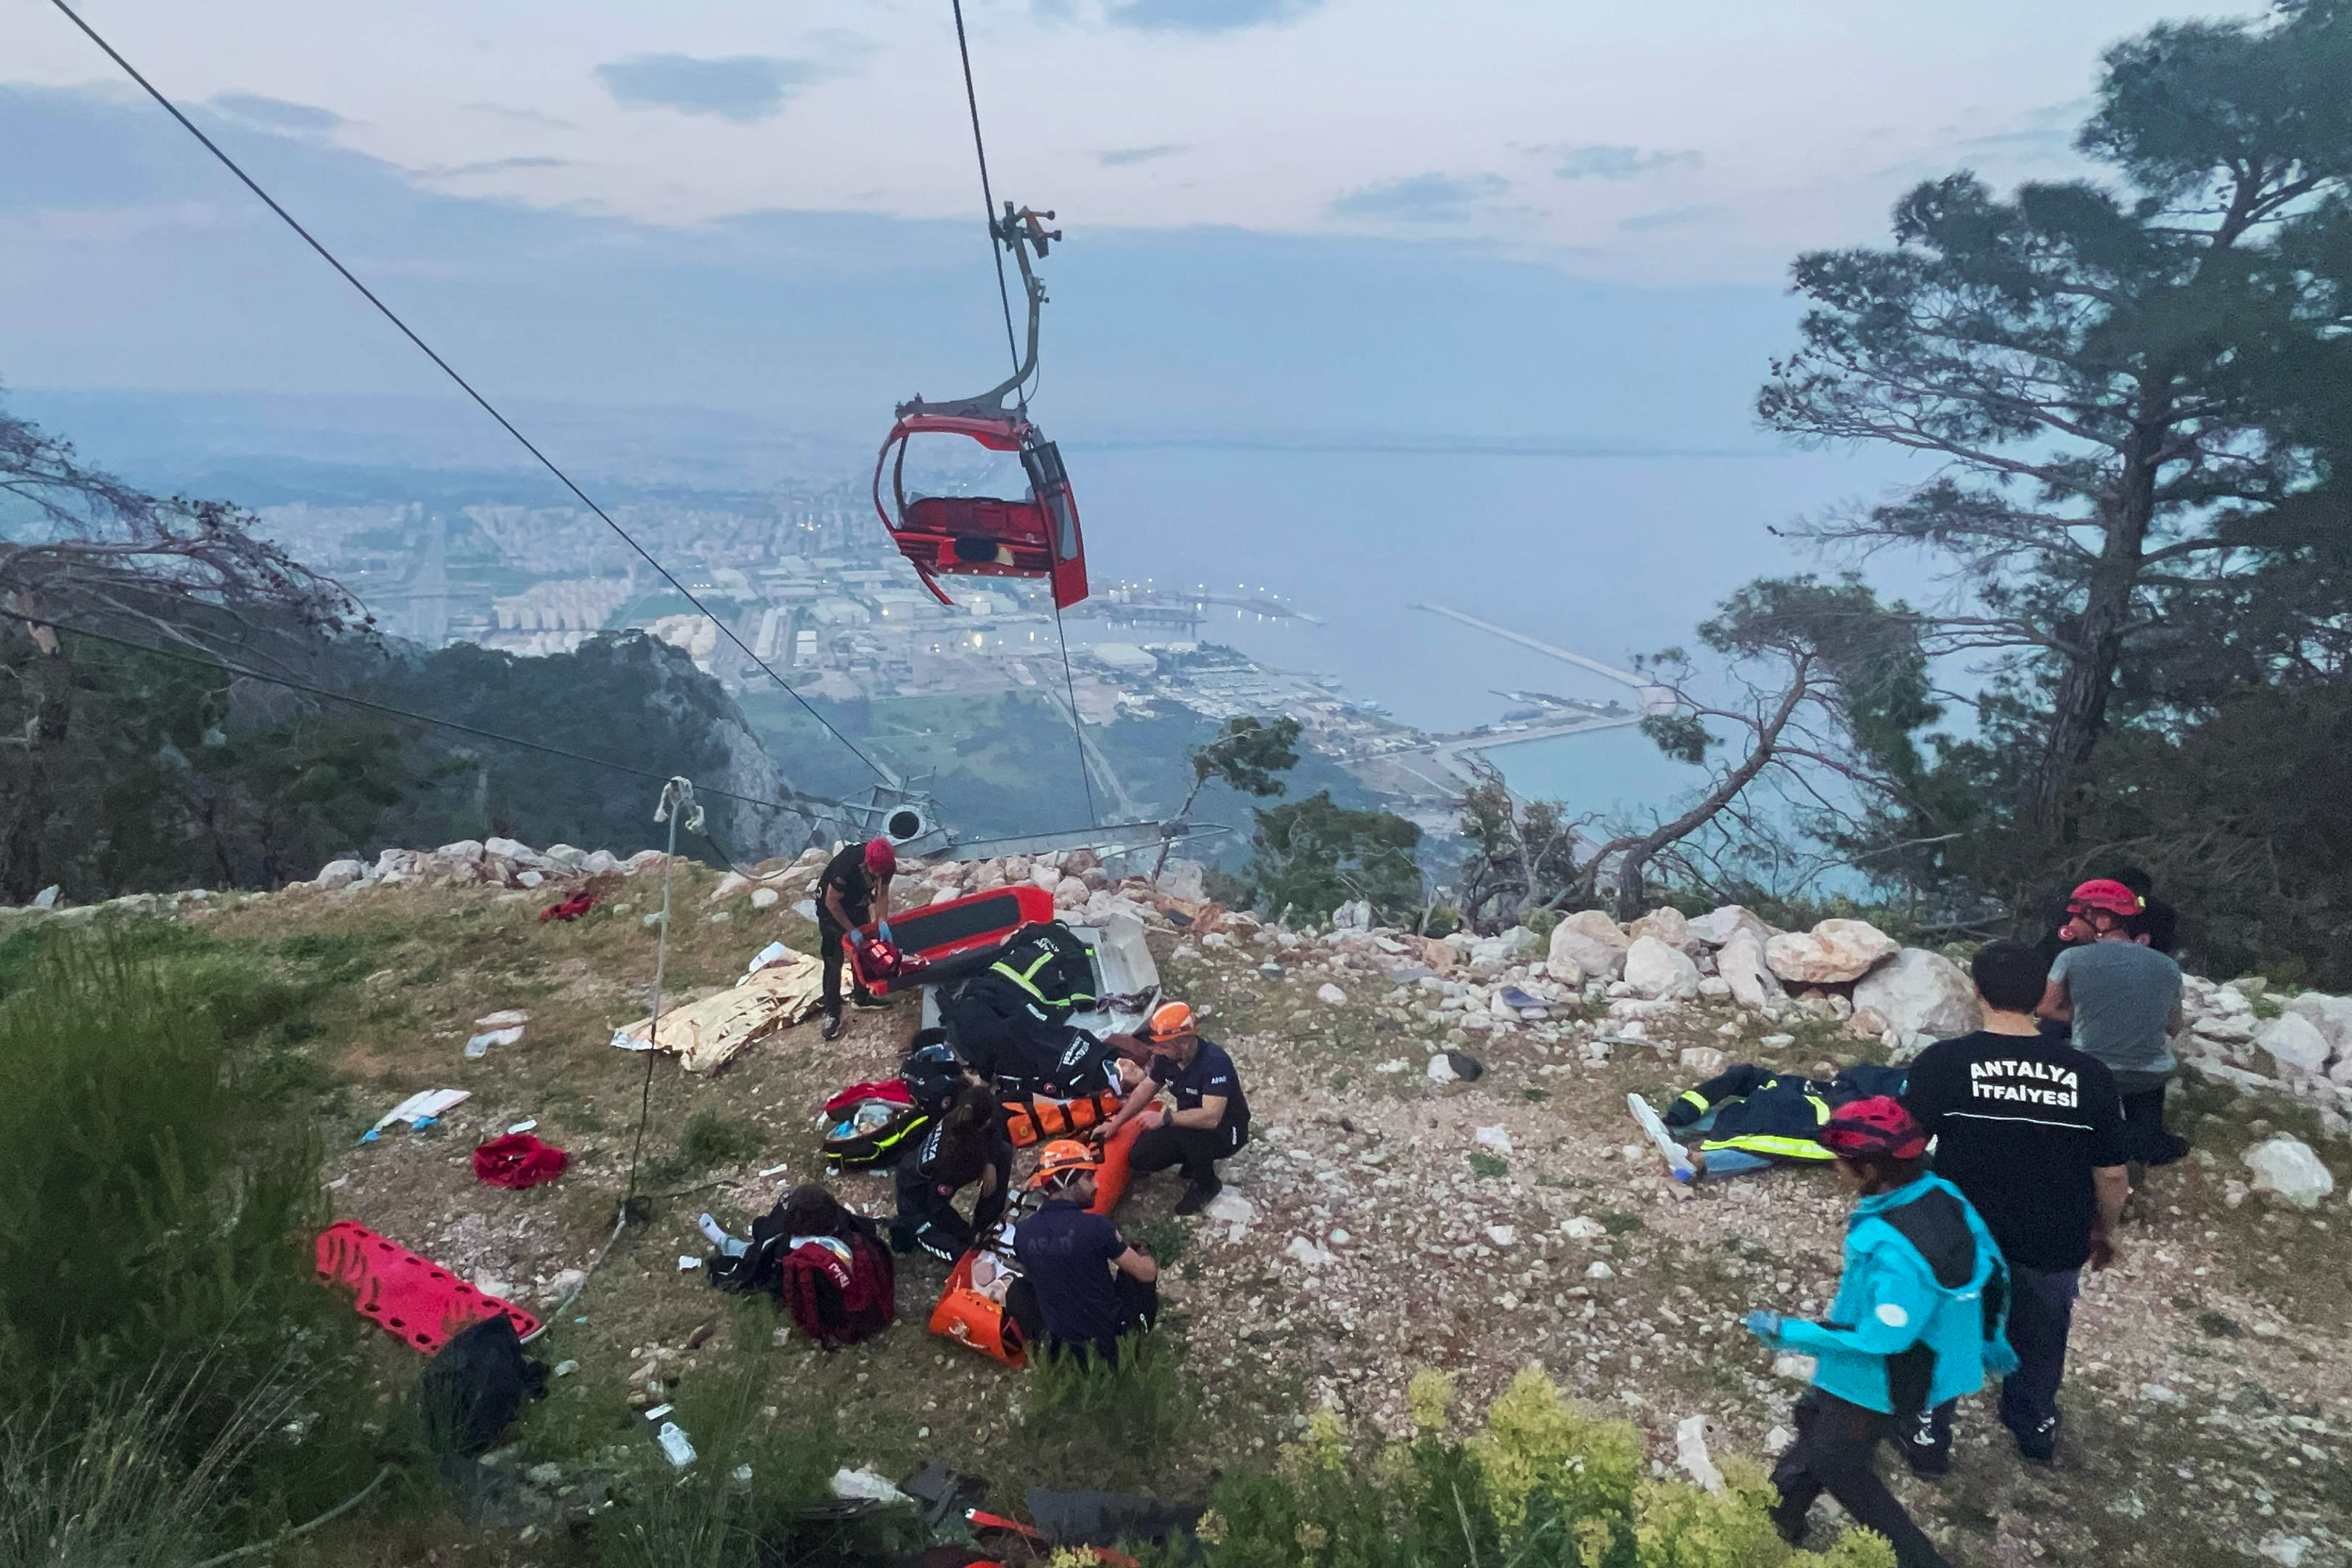 174 people stranded in the air are rescued, almost a day after a fatal cable car accident in turkey